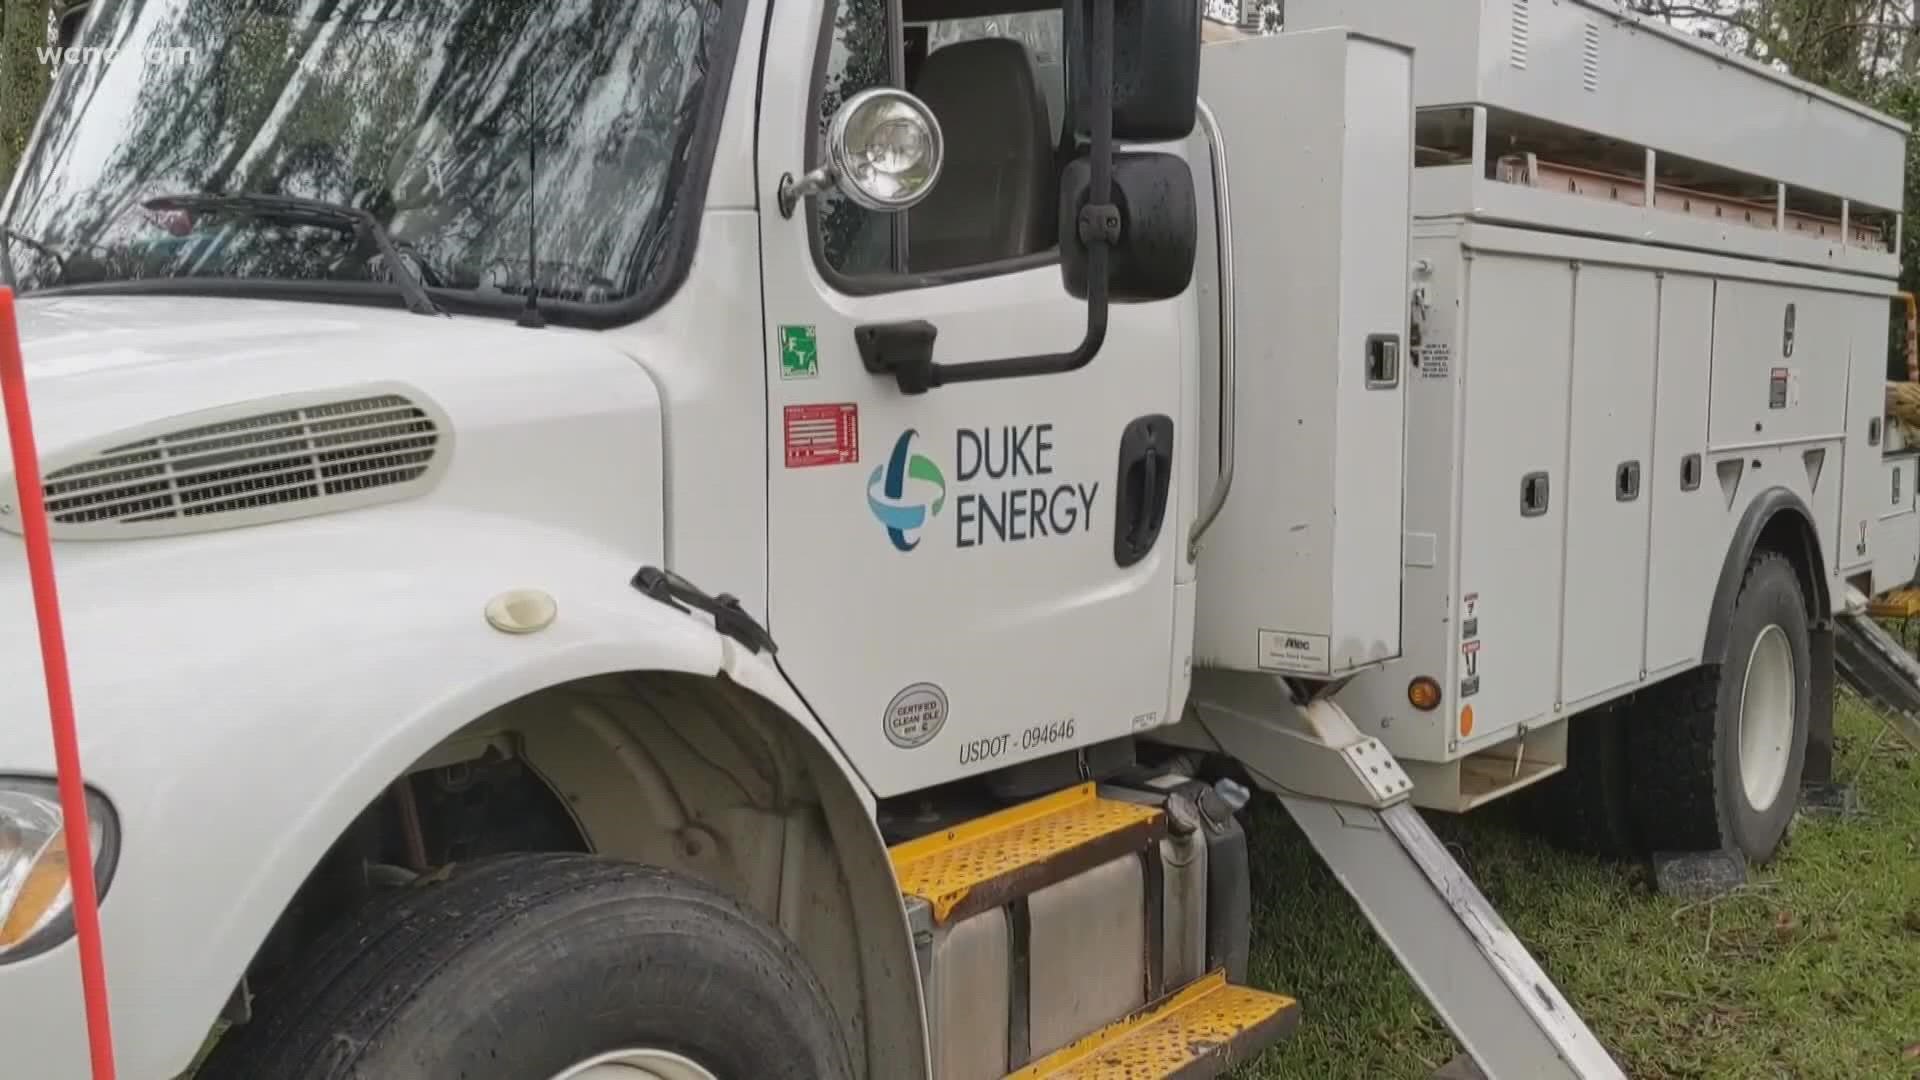 About 45 homes were impacted by the surge caused by an equipment failure, according to Duke Energy.